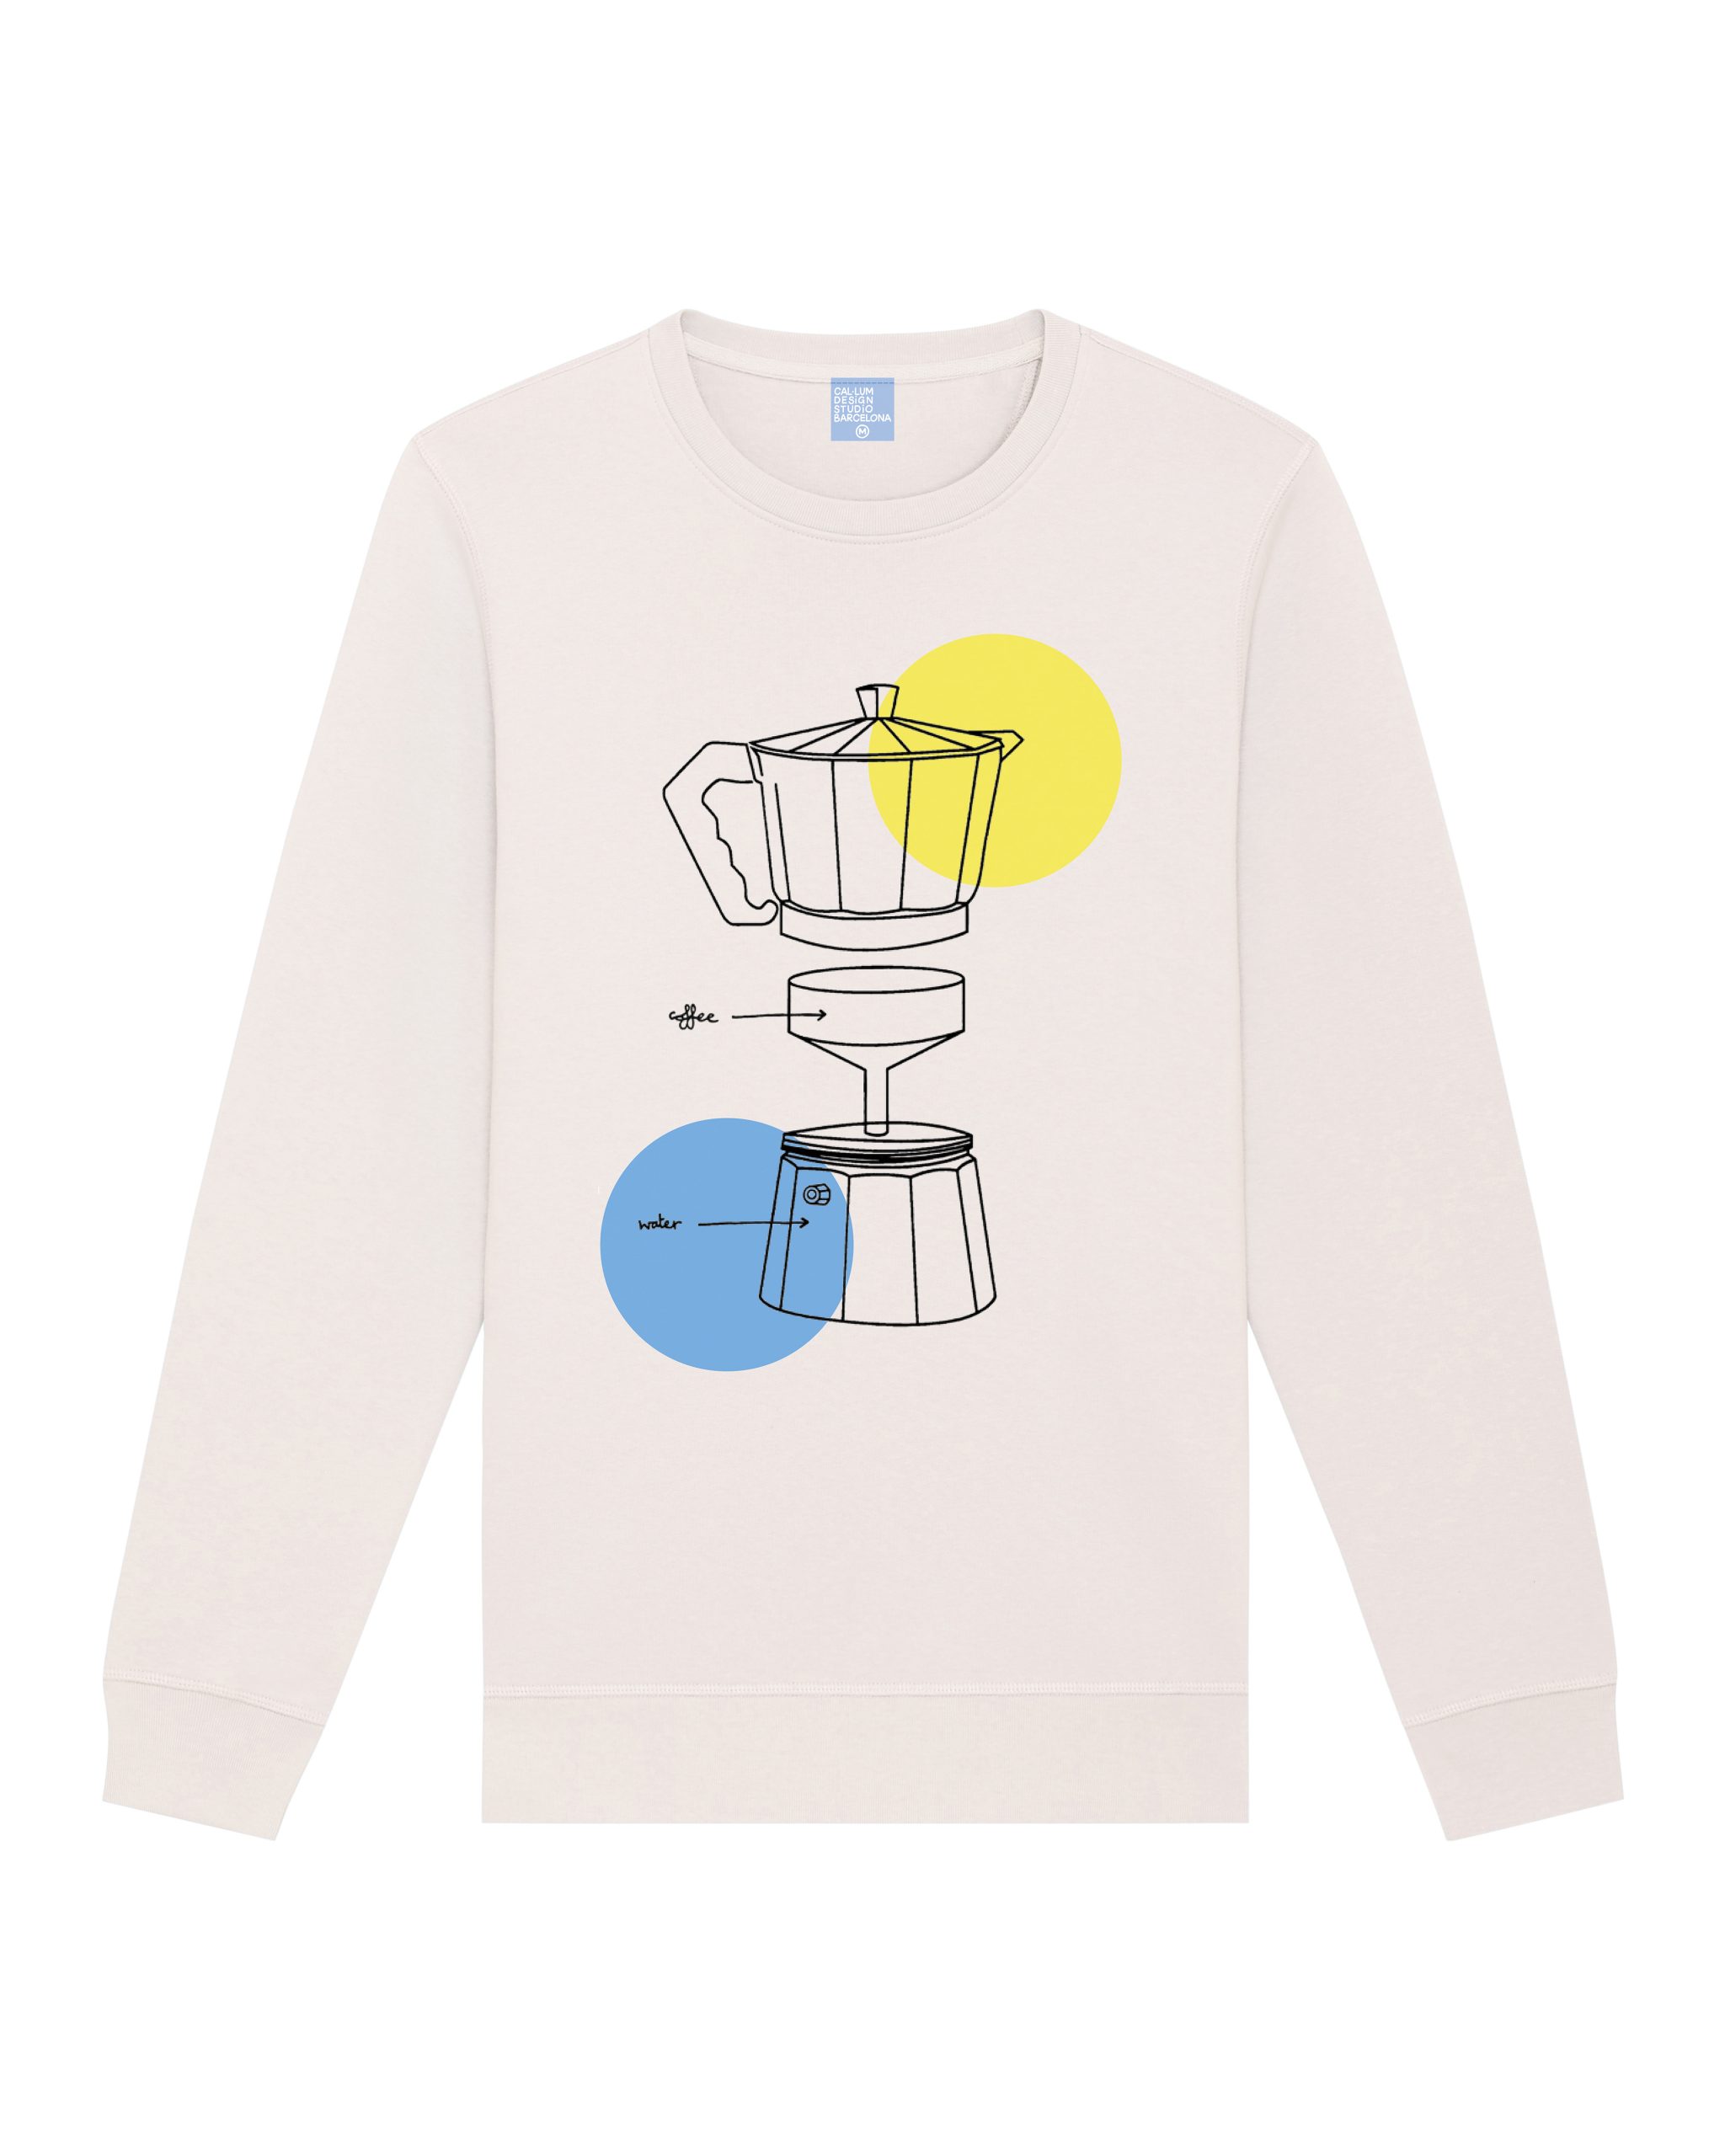 White sweatshirt with colorful coffee maker print